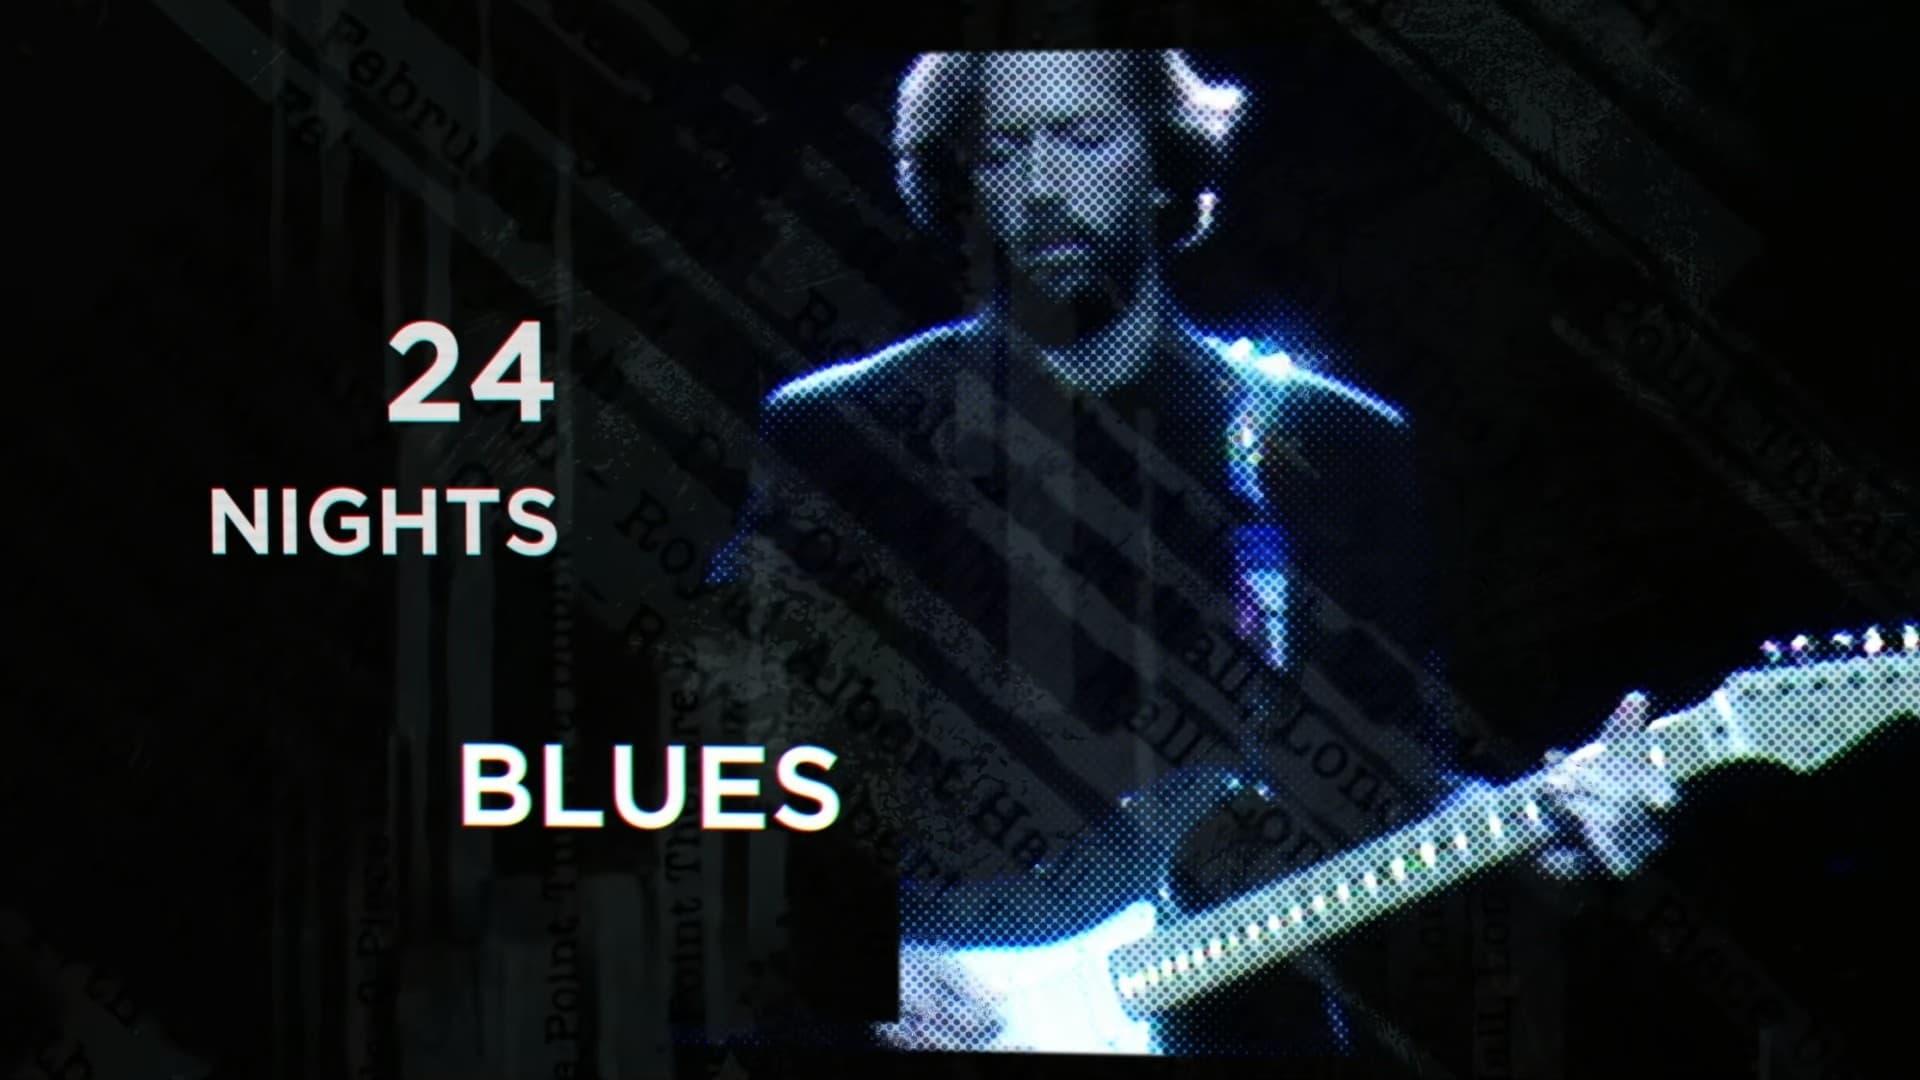 Eric Clapton - The Definitive 24 Nights - Blues backdrop